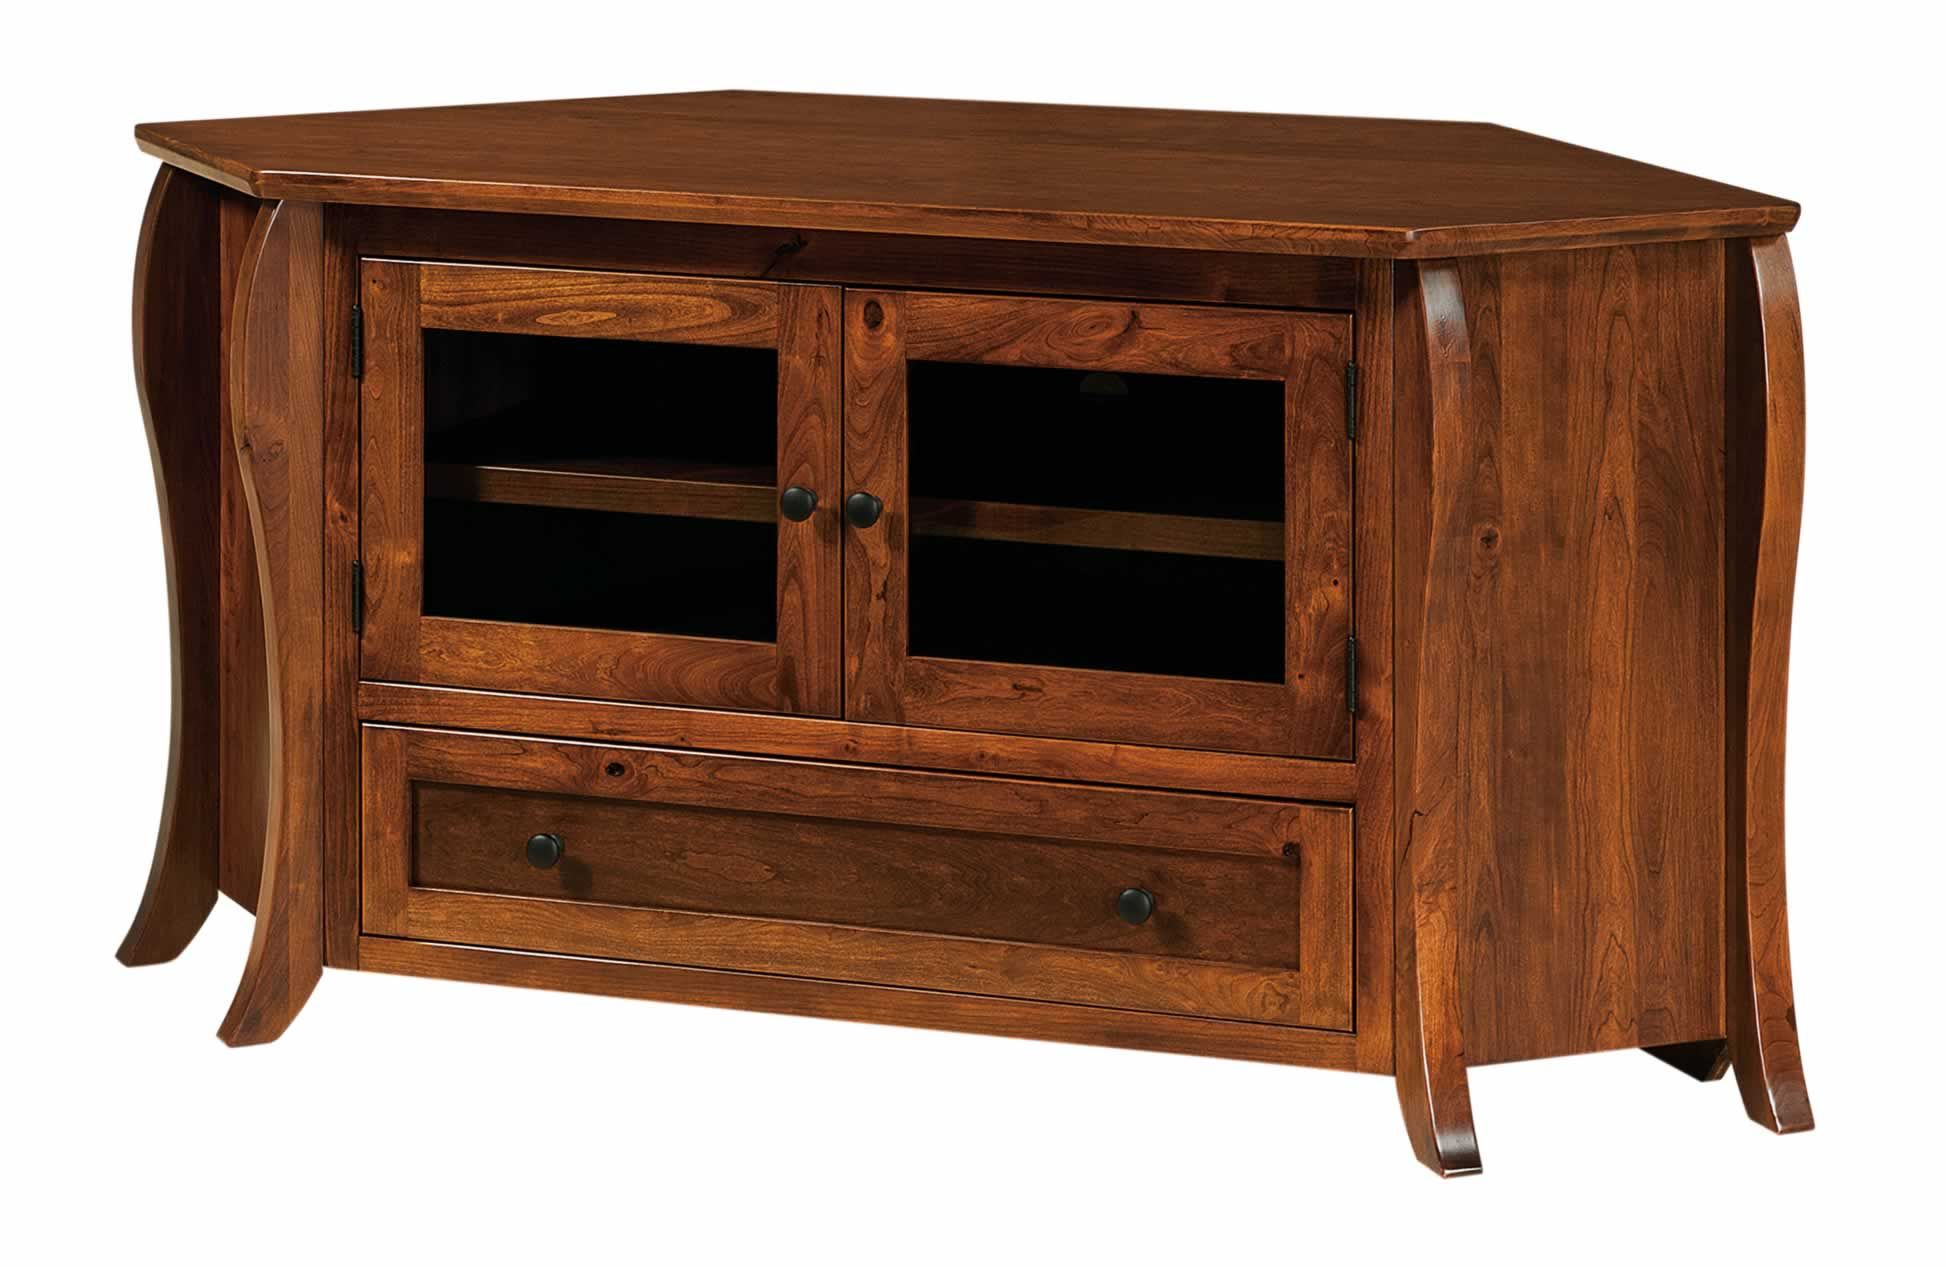 Flat Screen Tv Corner Cabinet – Heartland Amish Furniture Throughout Corner Tv Cabinets For Flat Screen (View 5 of 15)